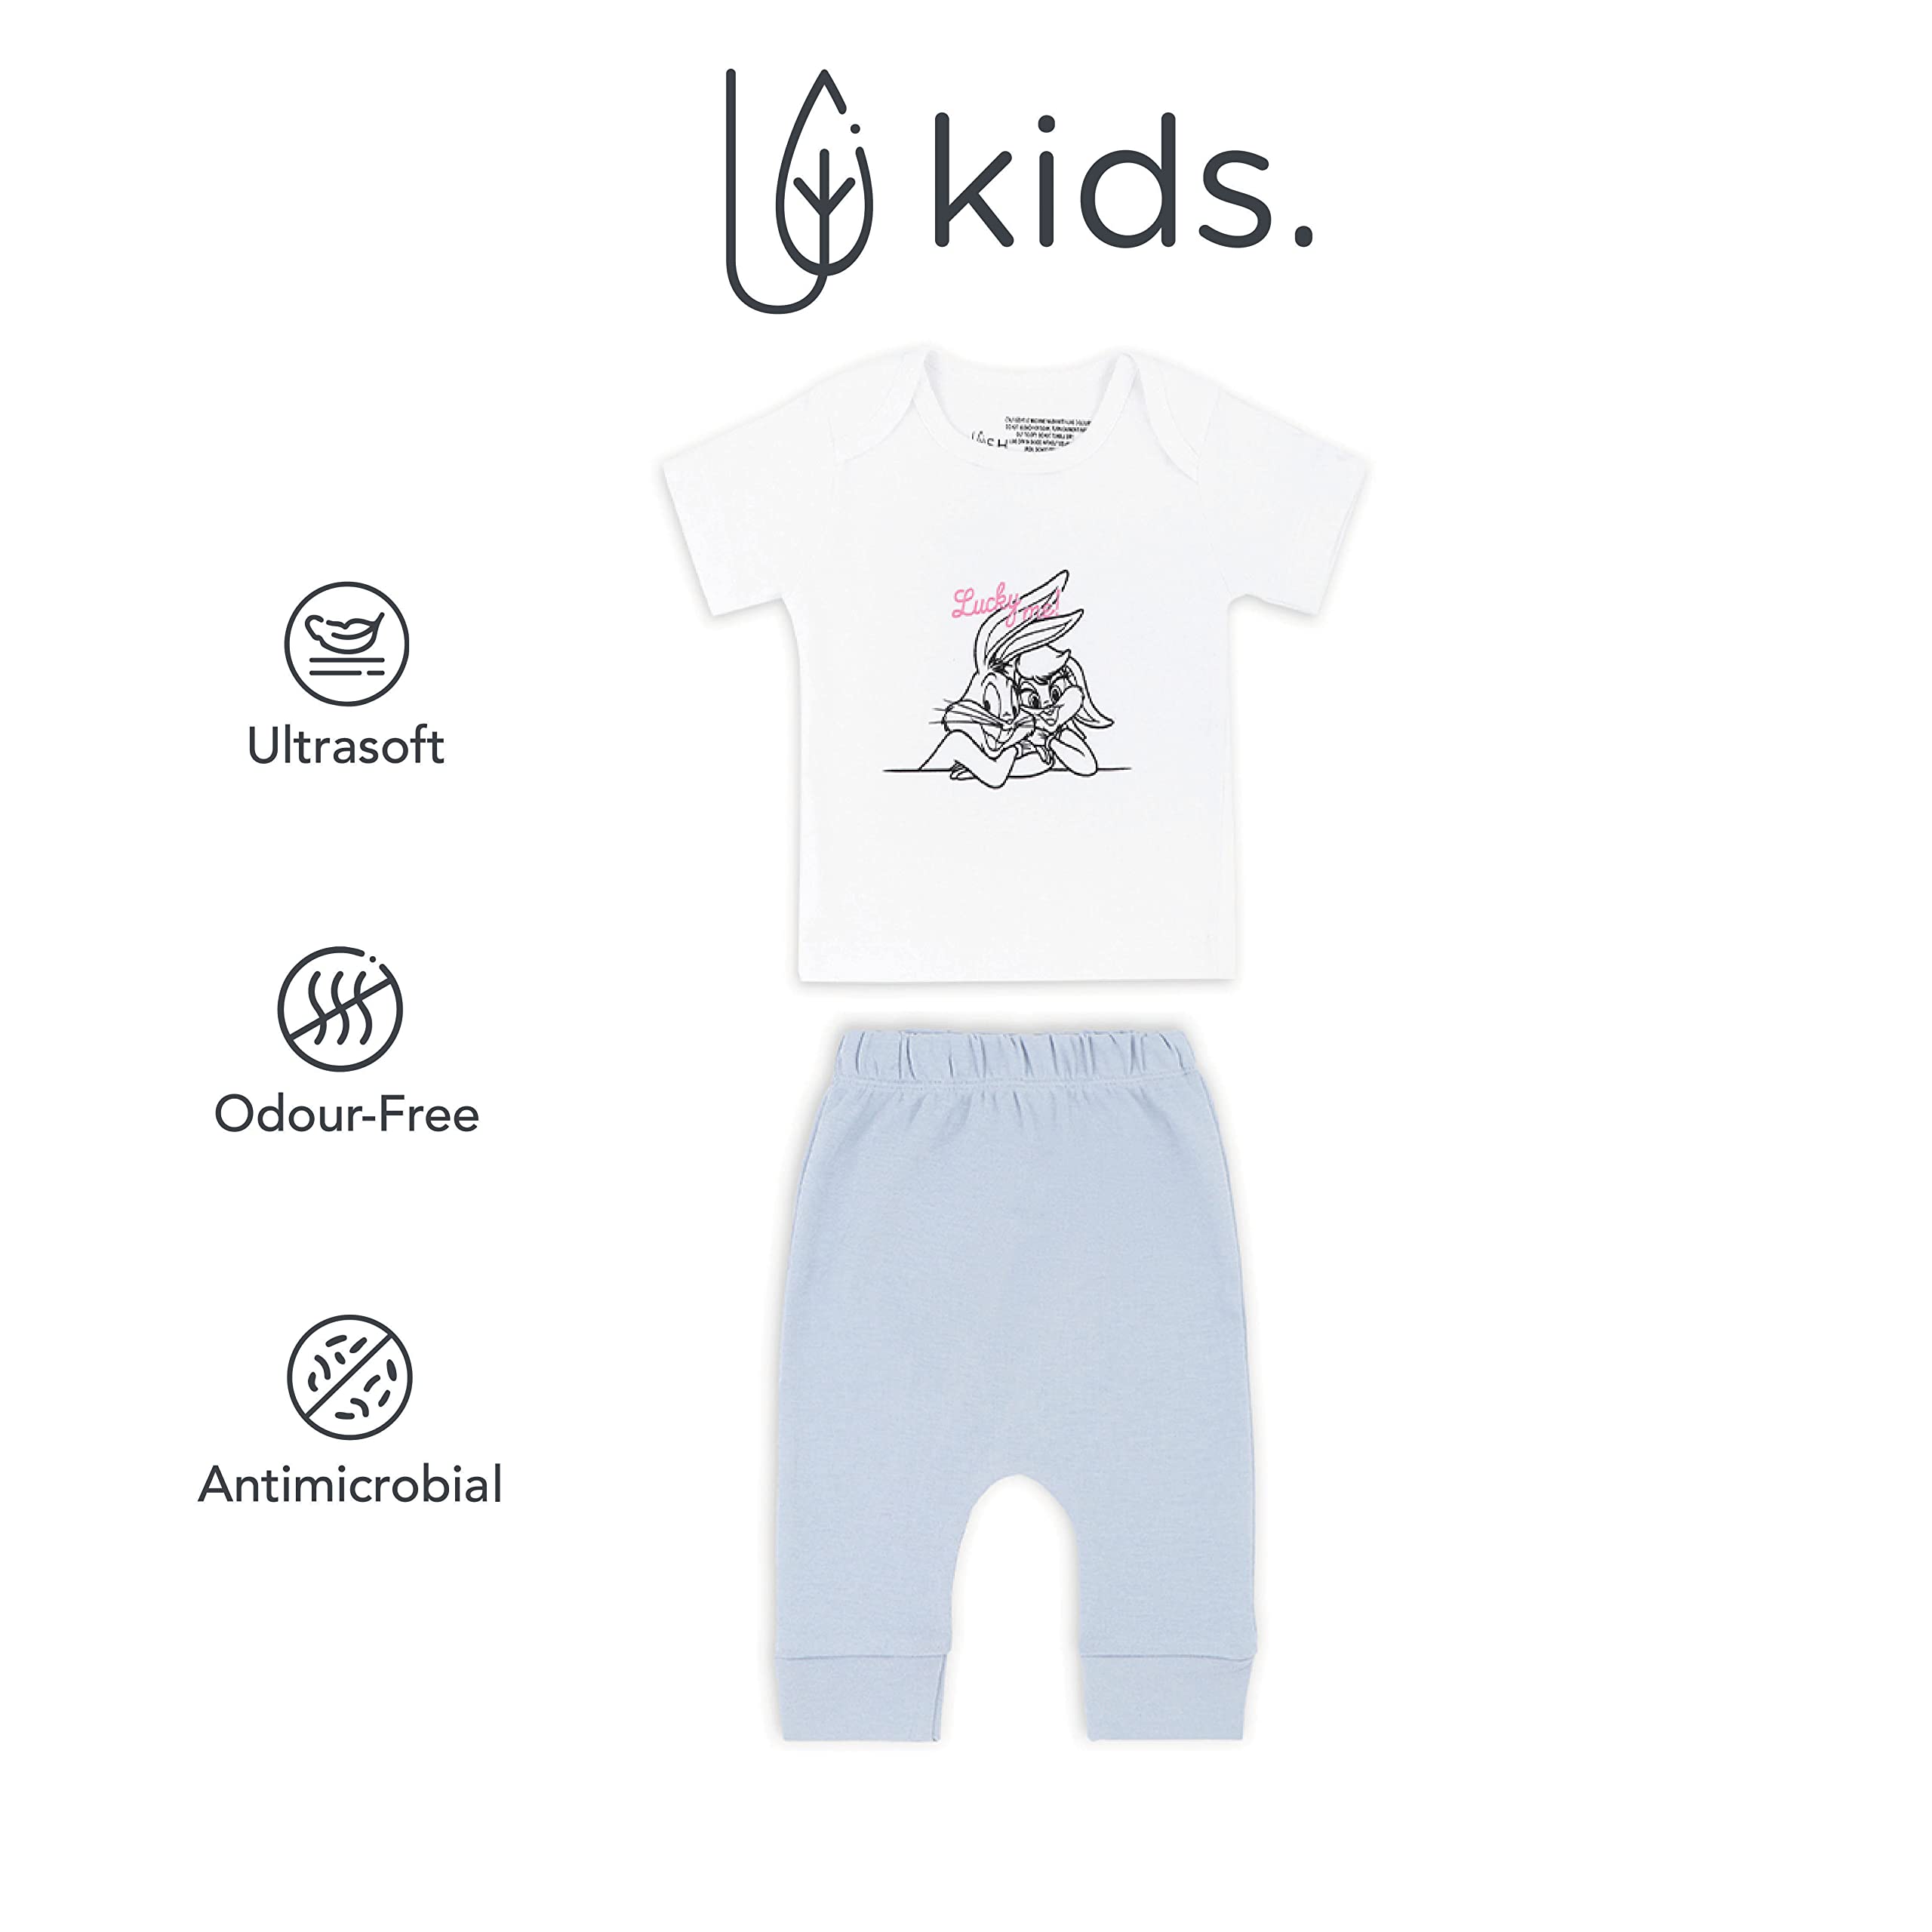 Mush Ultra Soft Bamboo Unisex Tees & Pants Combo Set for New Born Baby/Kids,Pack of 2 (6-12 Months, Stary Night)